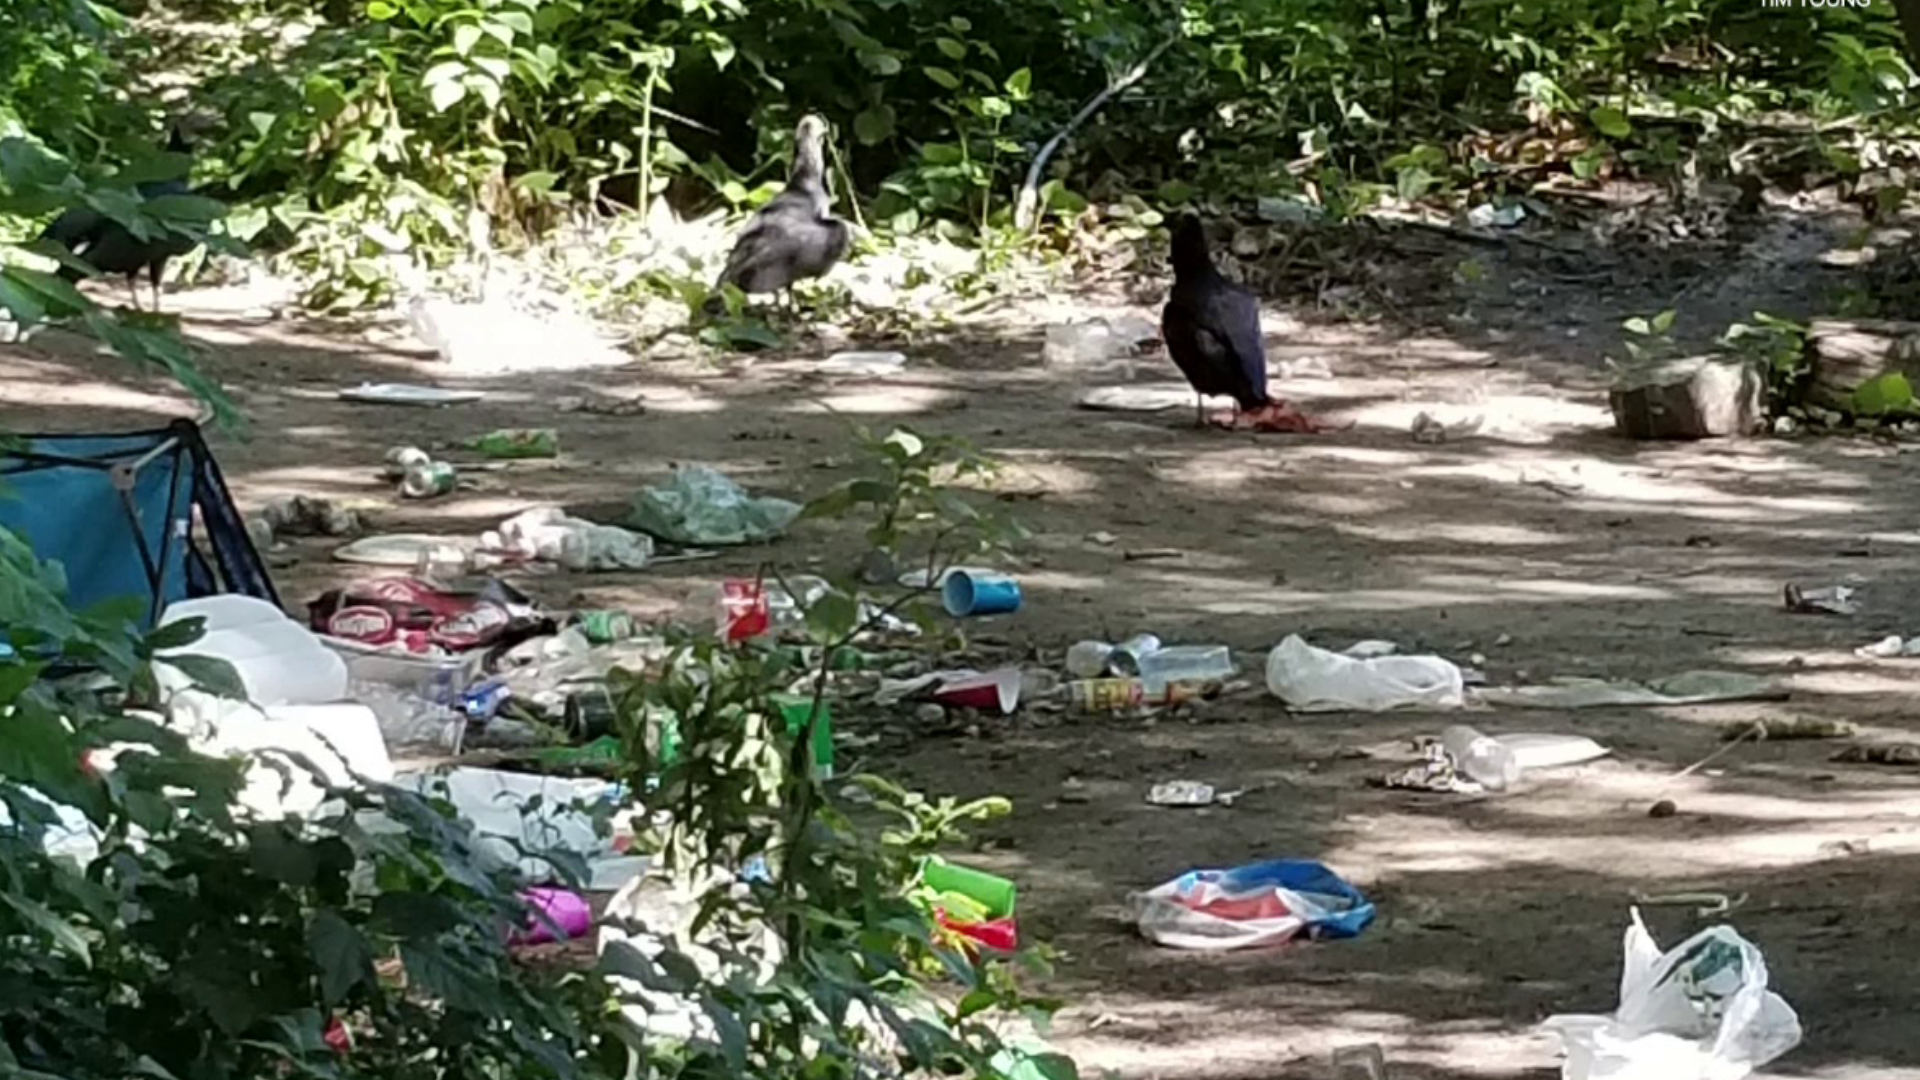 As more people continue to travel to the Poconos, more trash is ending up on trails, waterways, and in parks.